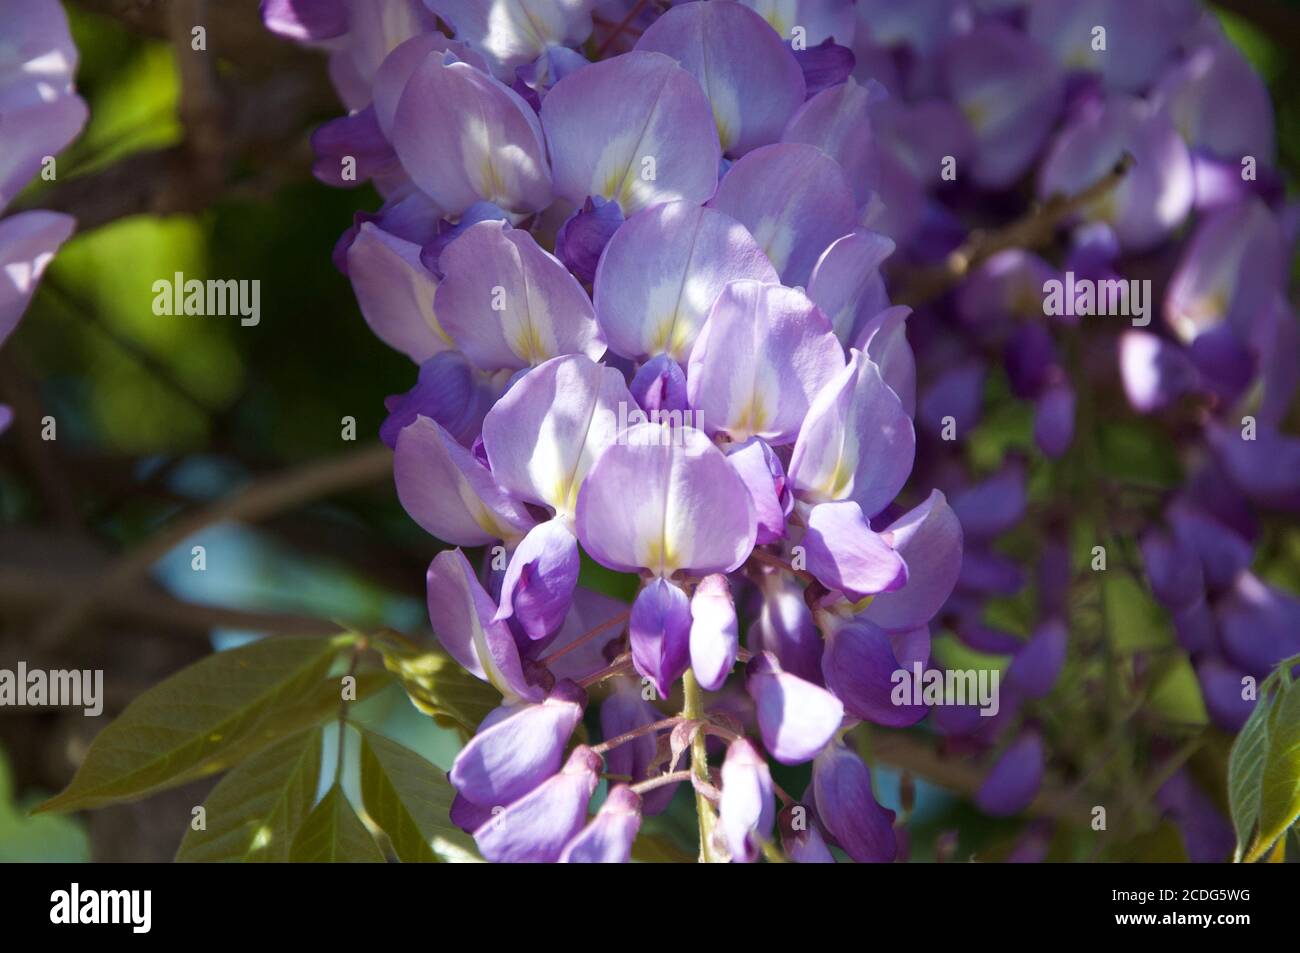 Wisteria on daylight with shadows from the tree. Detail of Wisteria floribunda flowers grapes in bloom, early summer violet purple flowering tree. Stock Photo